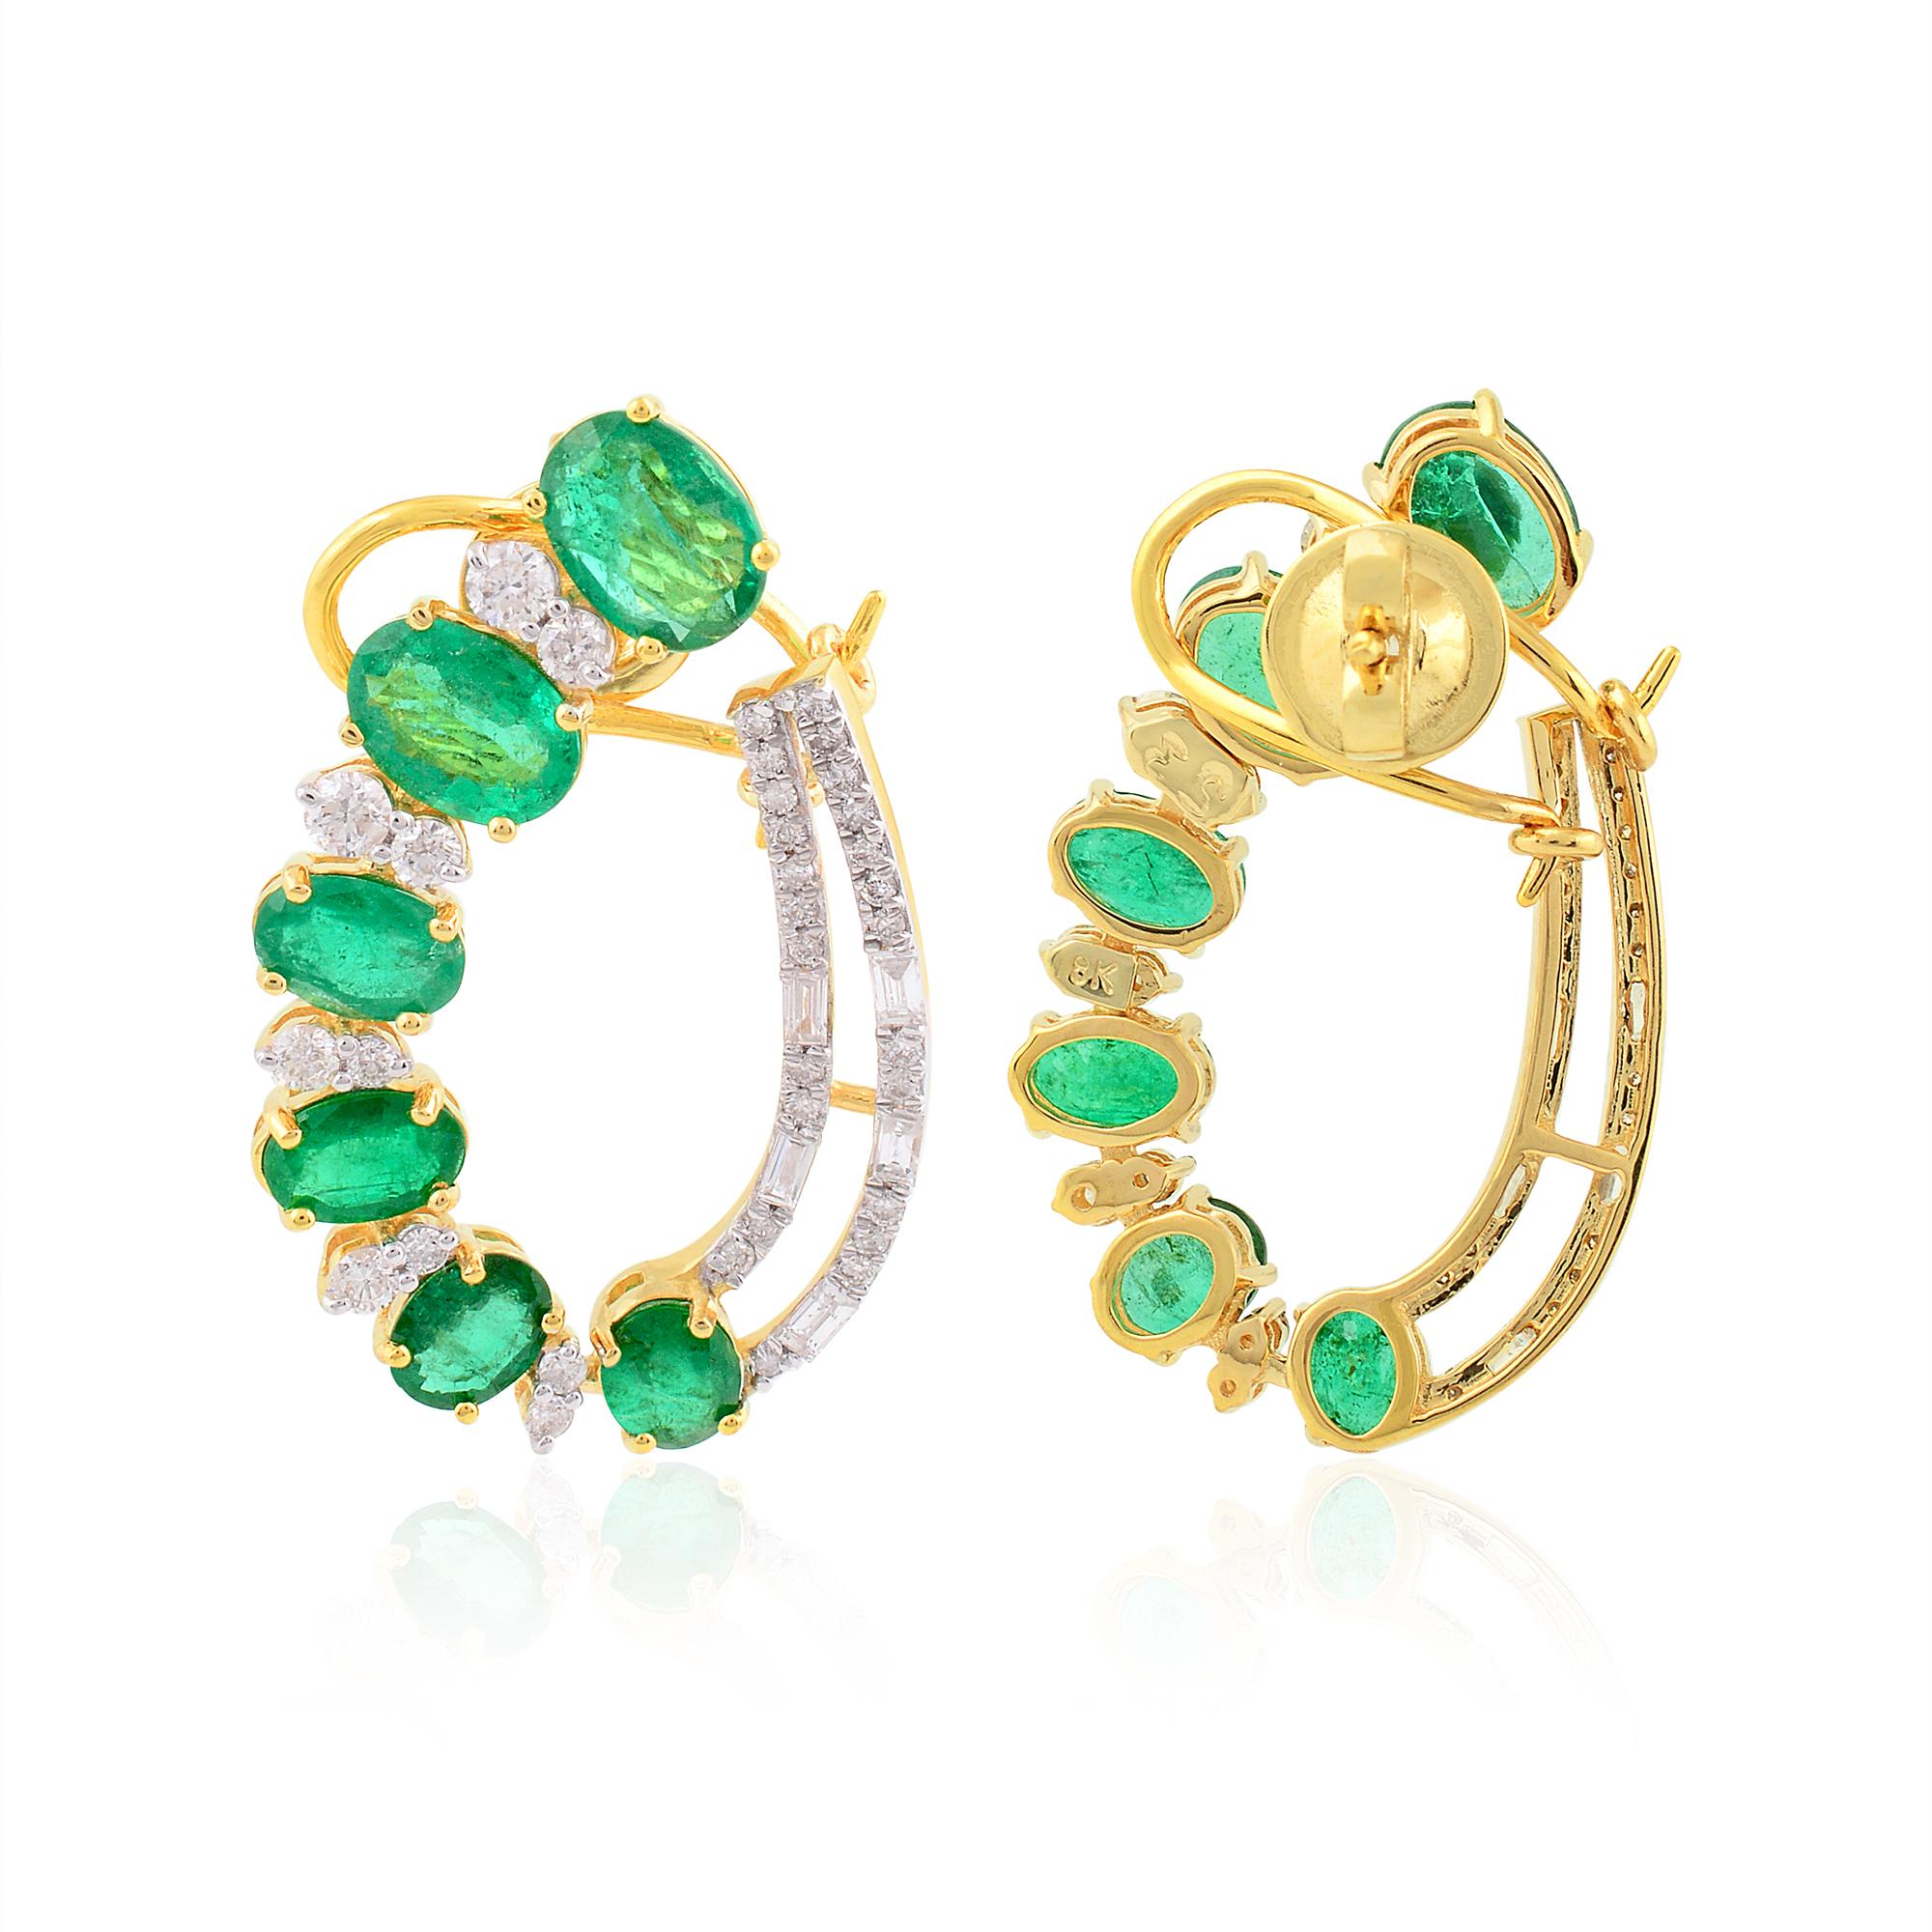 Modern Oval Natural Emerald Stud Earrings Pave Diamond Solid 14k Yellow Gold Jewelry For Sale